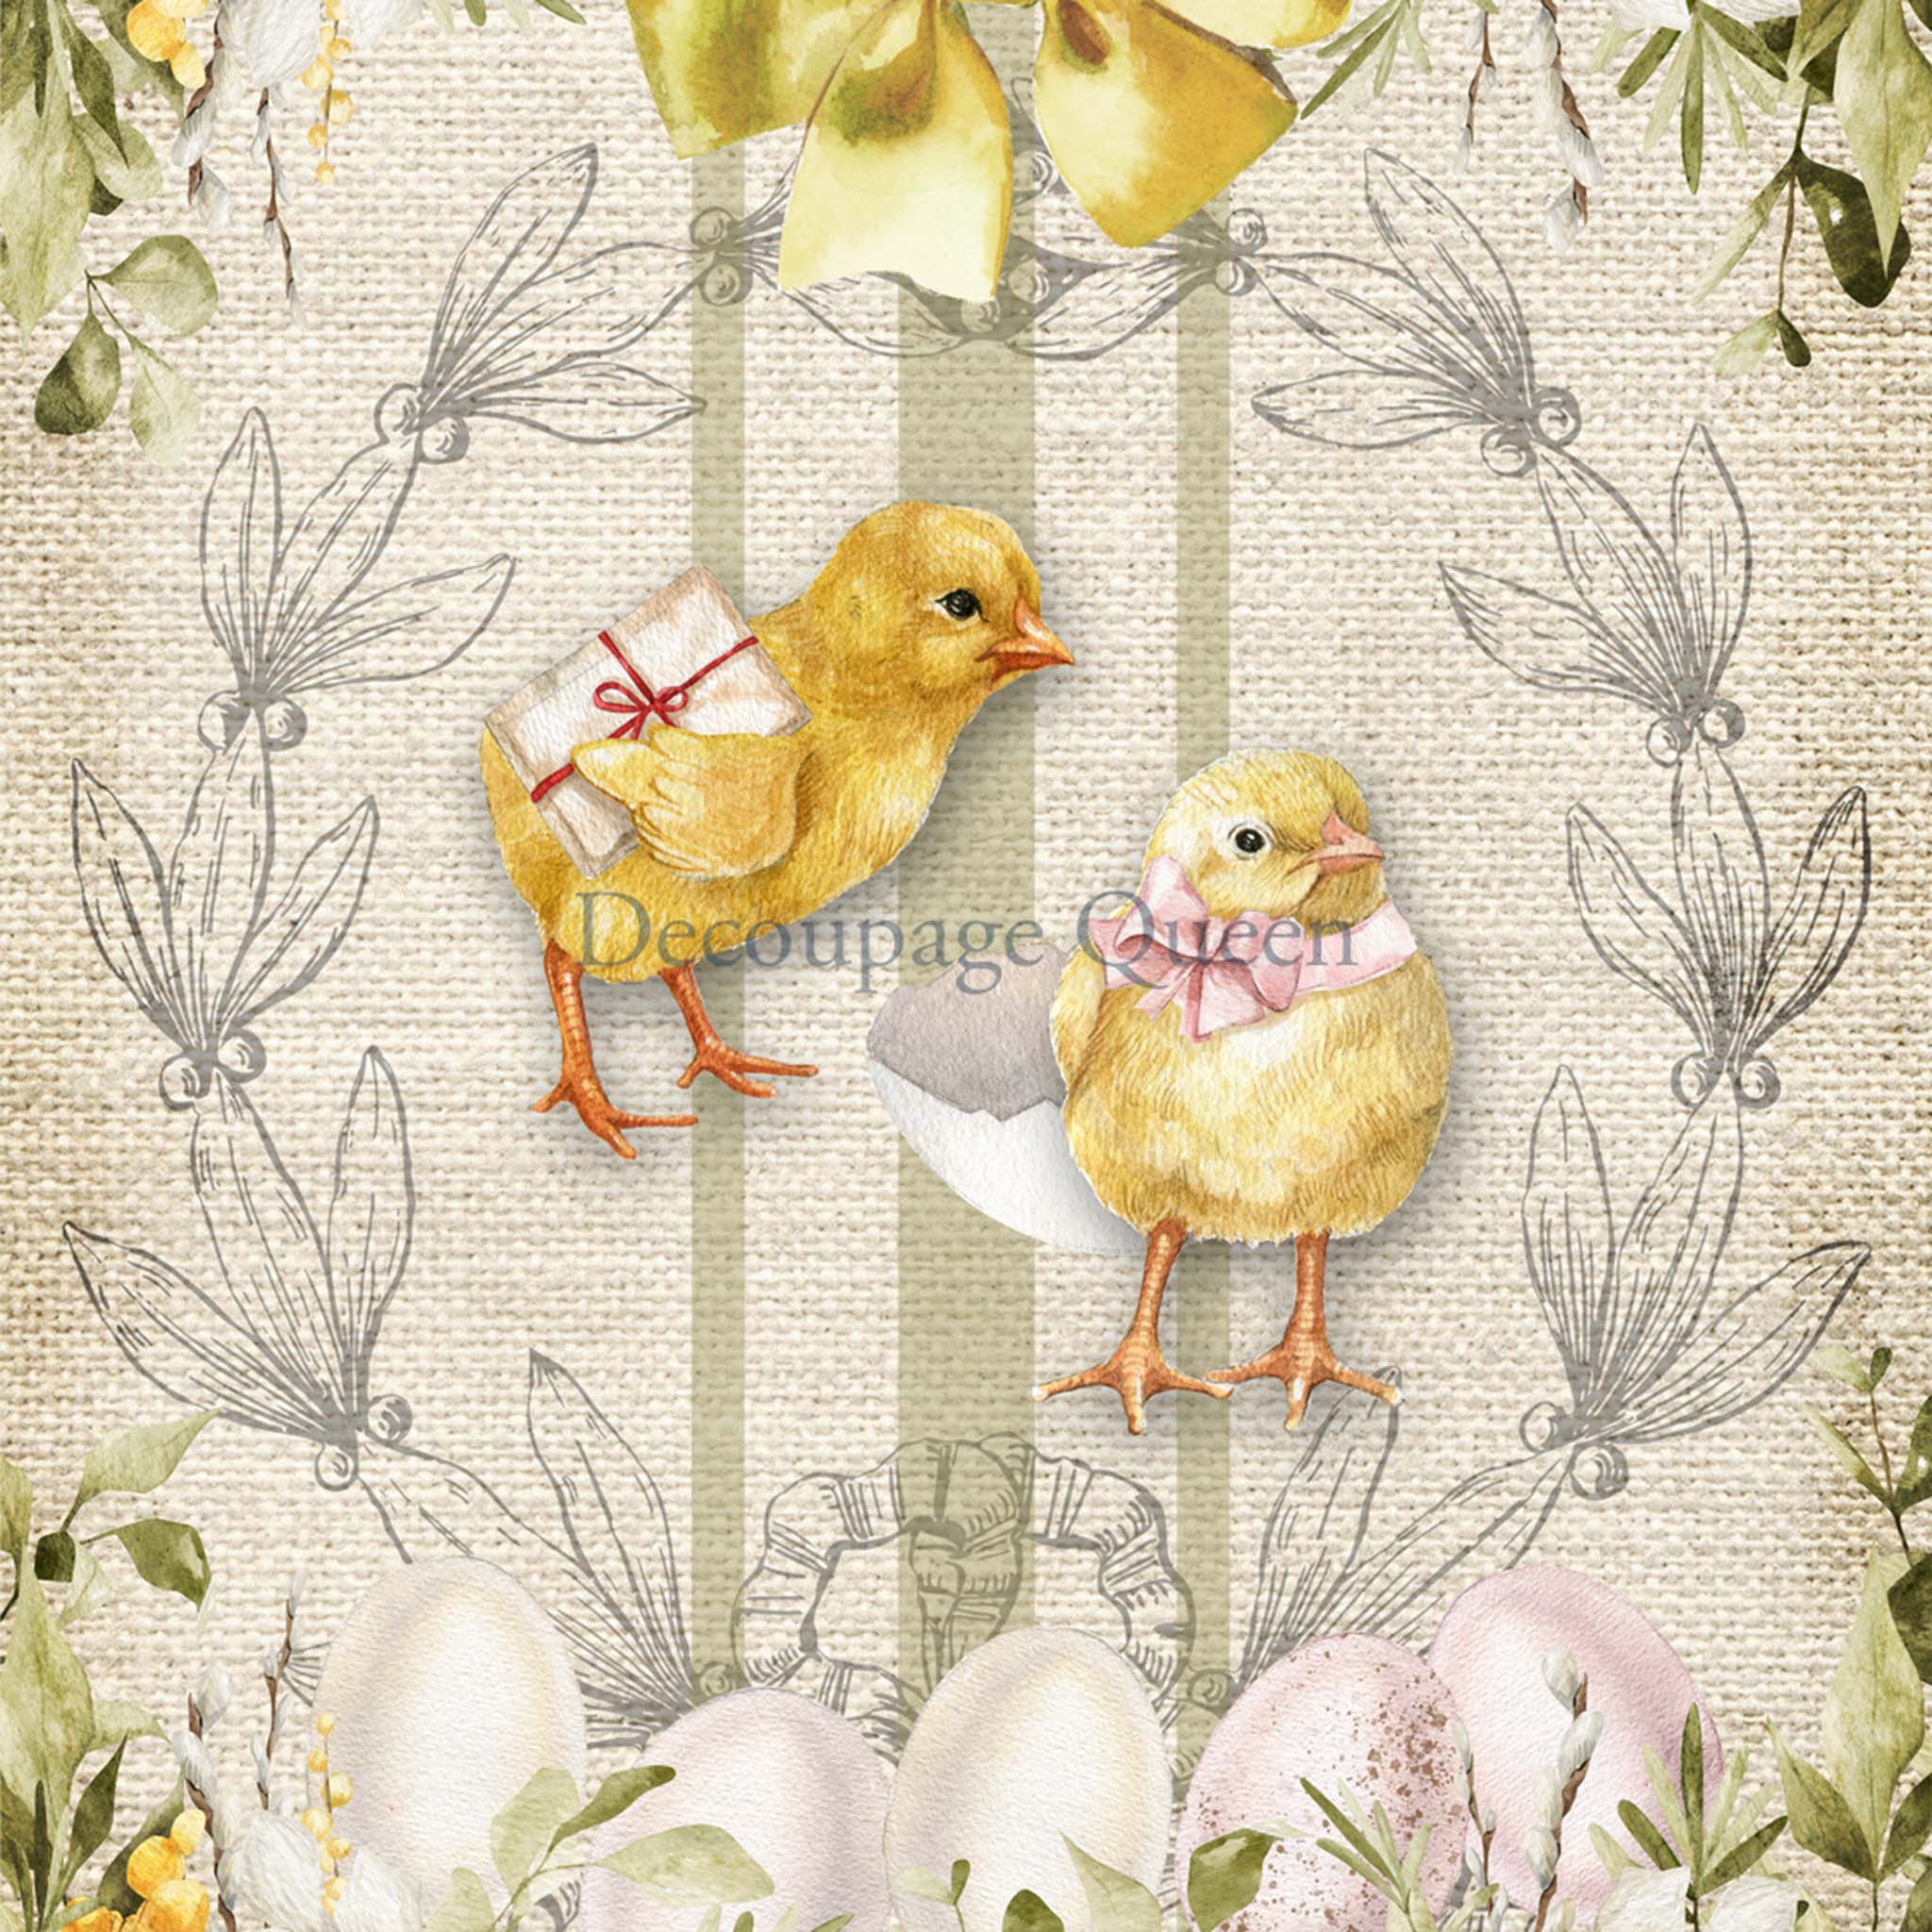 Close-up of an A3 rice paper design that features two adorable yellow chicks nestled amidst a floral backdrop on a rustic grain sack.